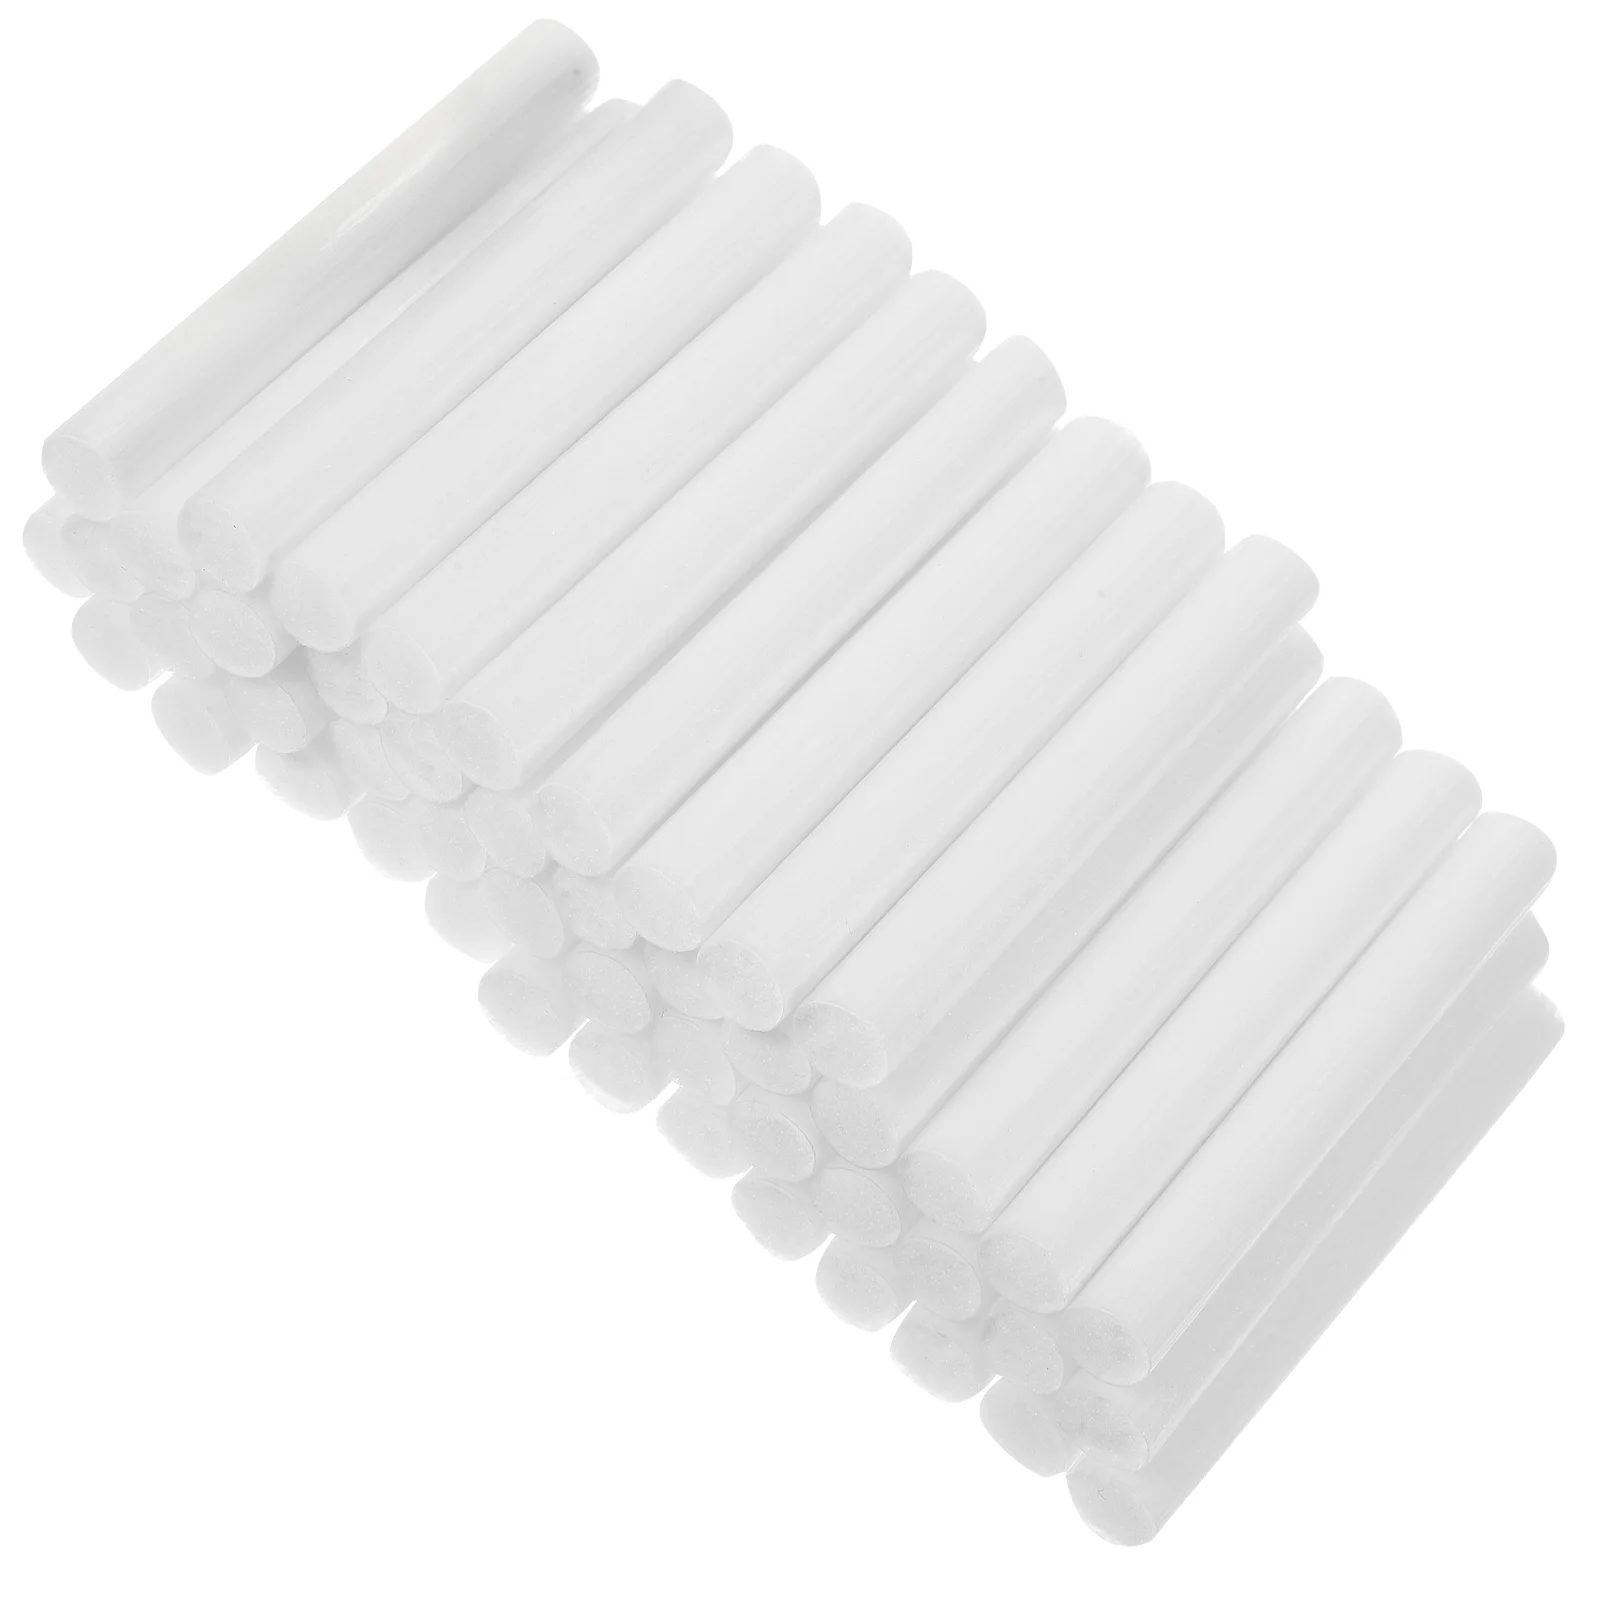 100 Pcs Pro Markers Pens Cotton Core Replacements Refills Marking Kits White Painting for Student